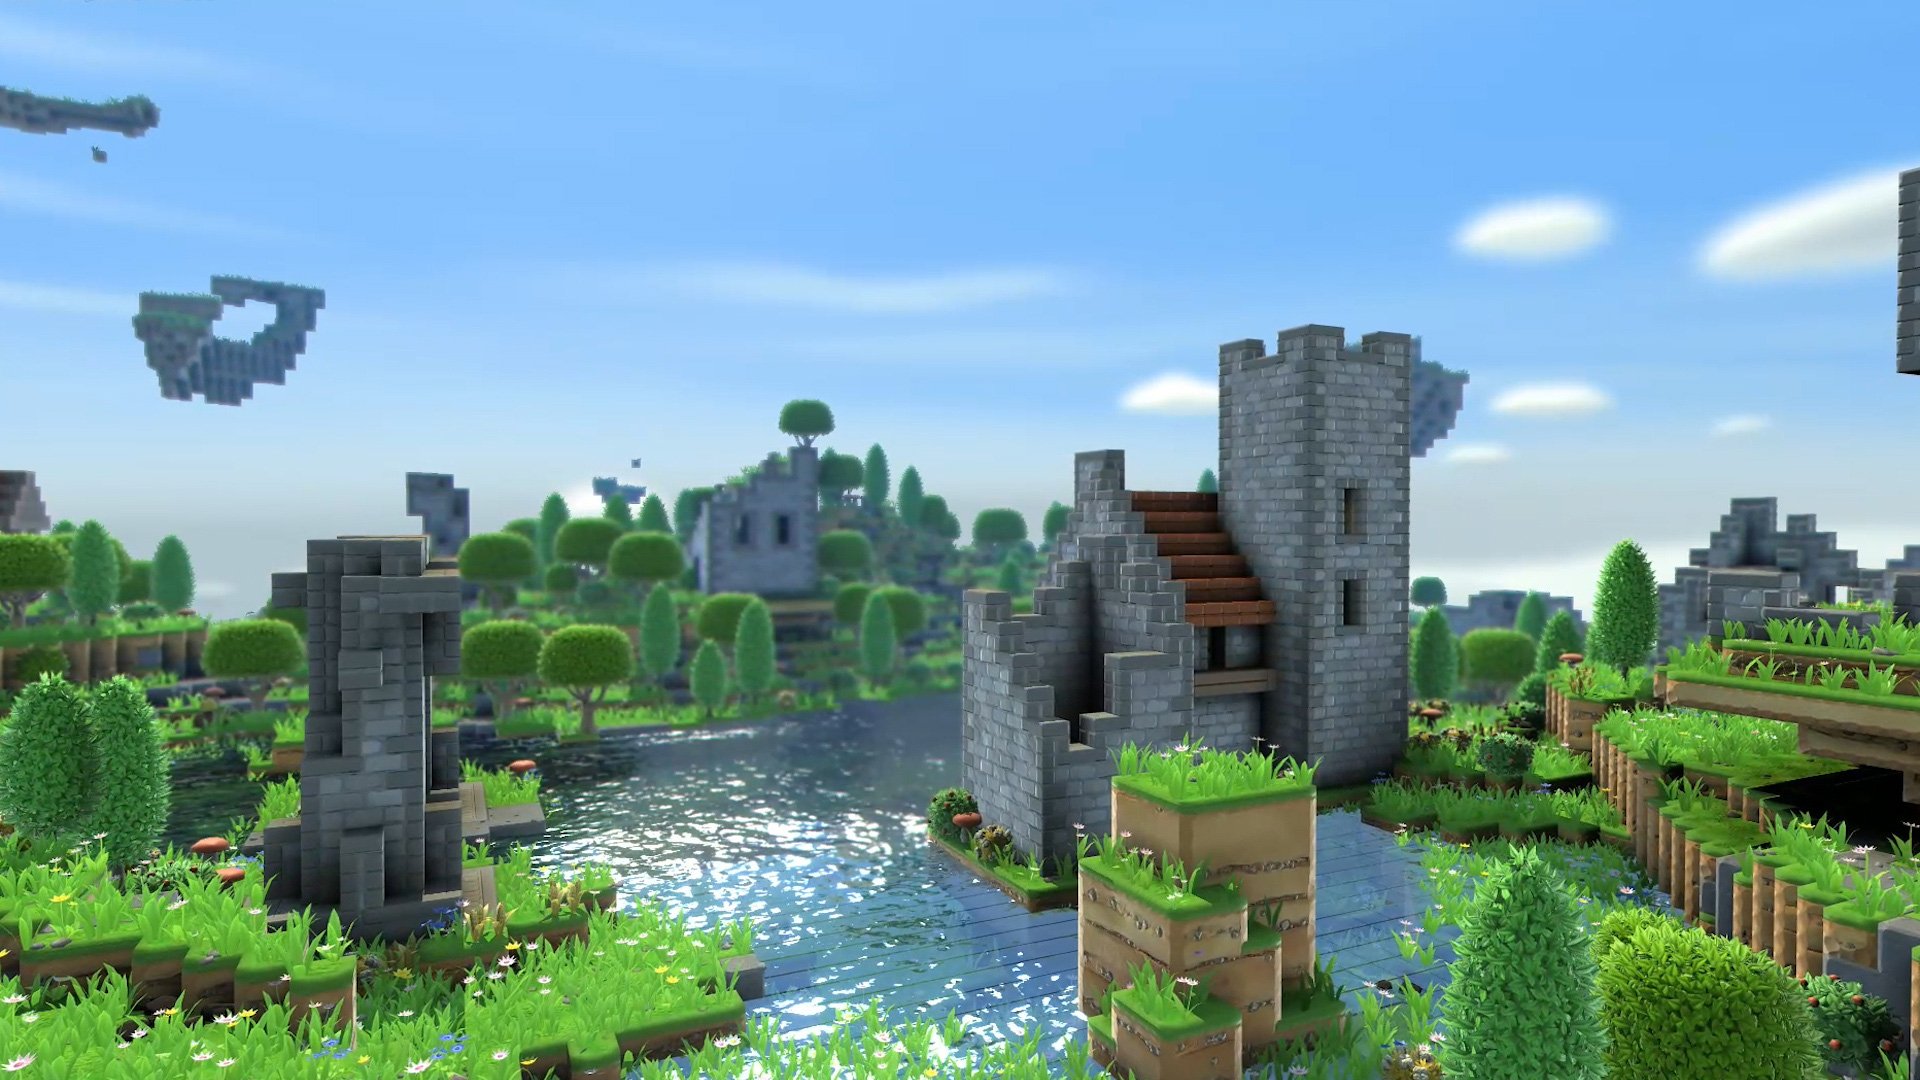 HD desktop wallpaper from Portal Knights featuring a serene landscape with medieval structures, lush greenery, and a tranquil river.